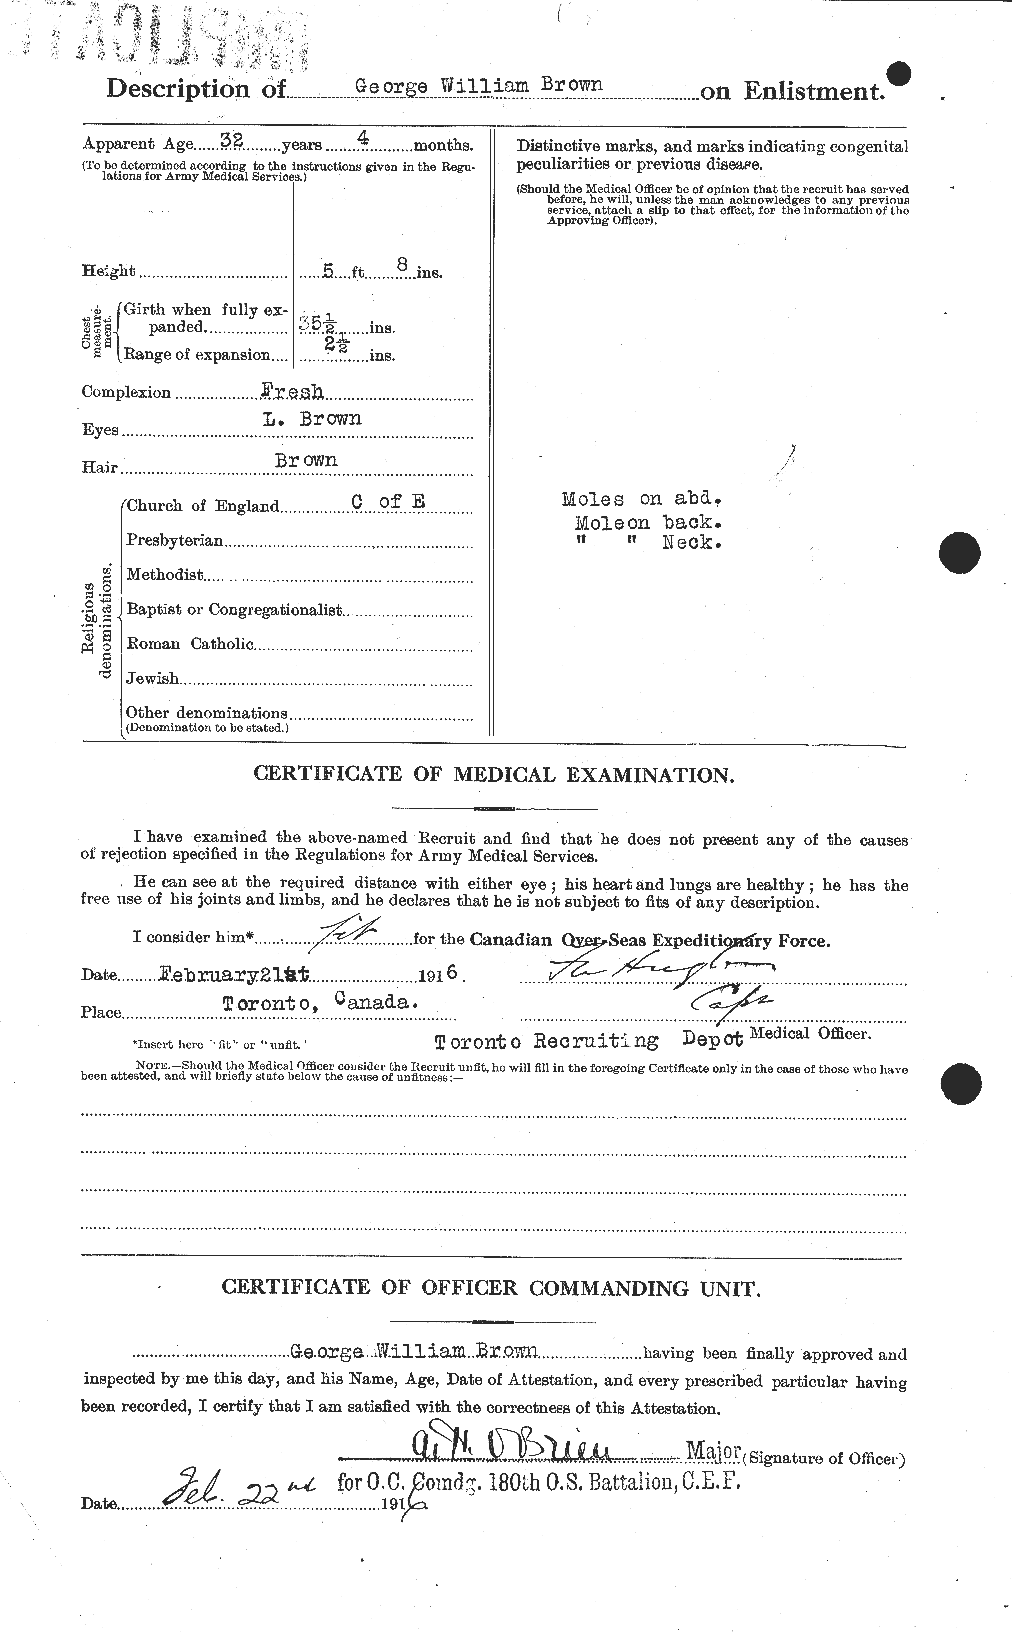 Personnel Records of the First World War - CEF 262591b